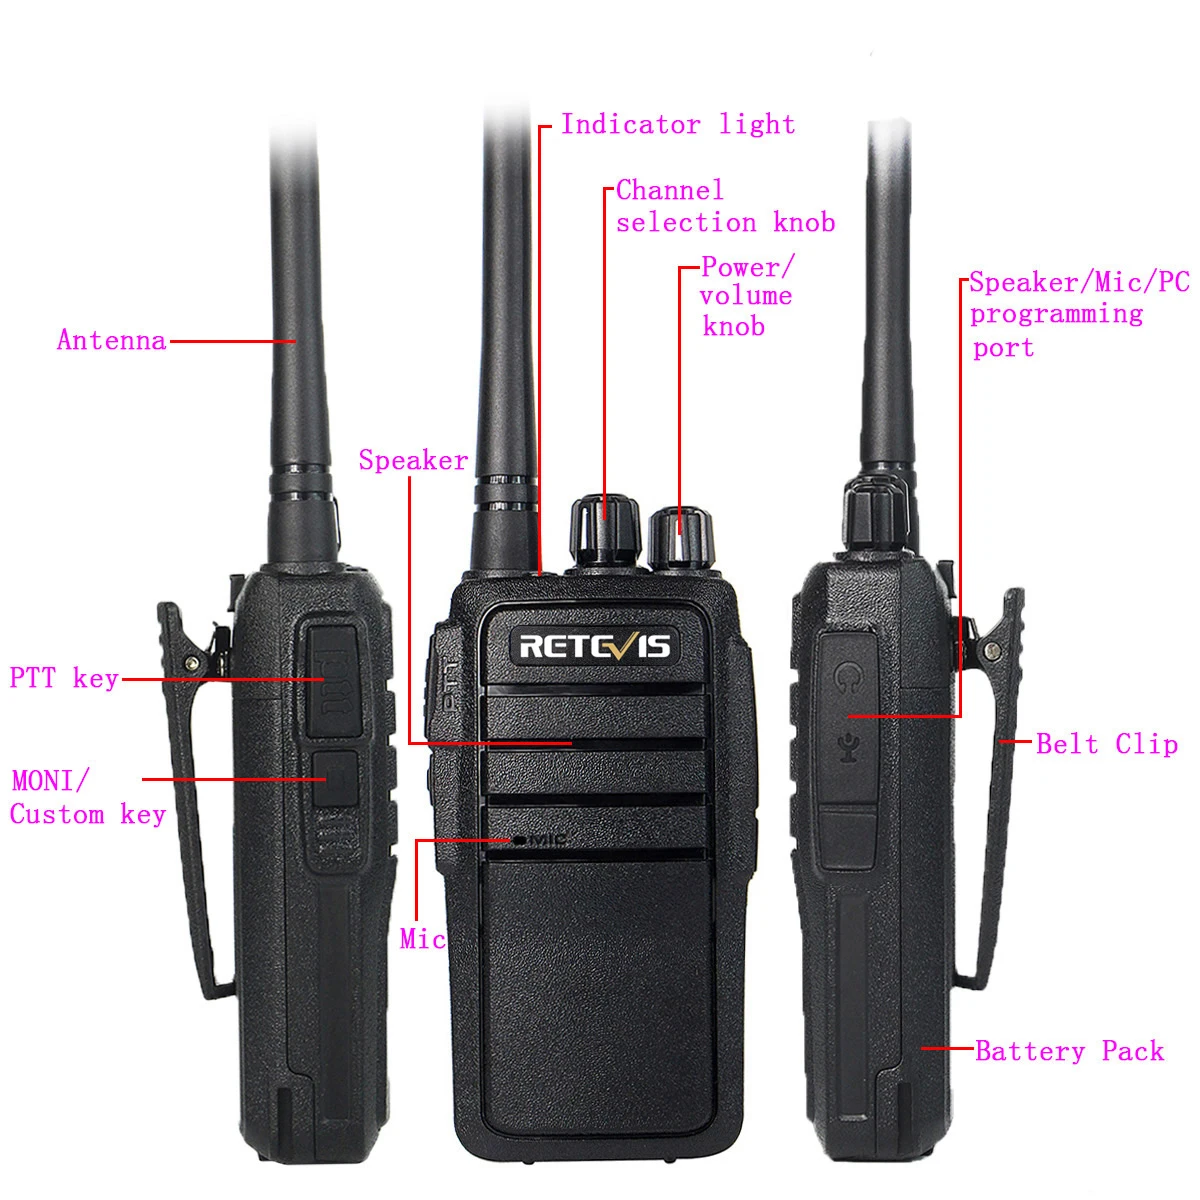 

10Pack Retevis RT21 FRS 2W FCC License Free School Walkie Talkie 16CH UHF VOX Scan fixed antenna Two Way Radio+Programming Cable